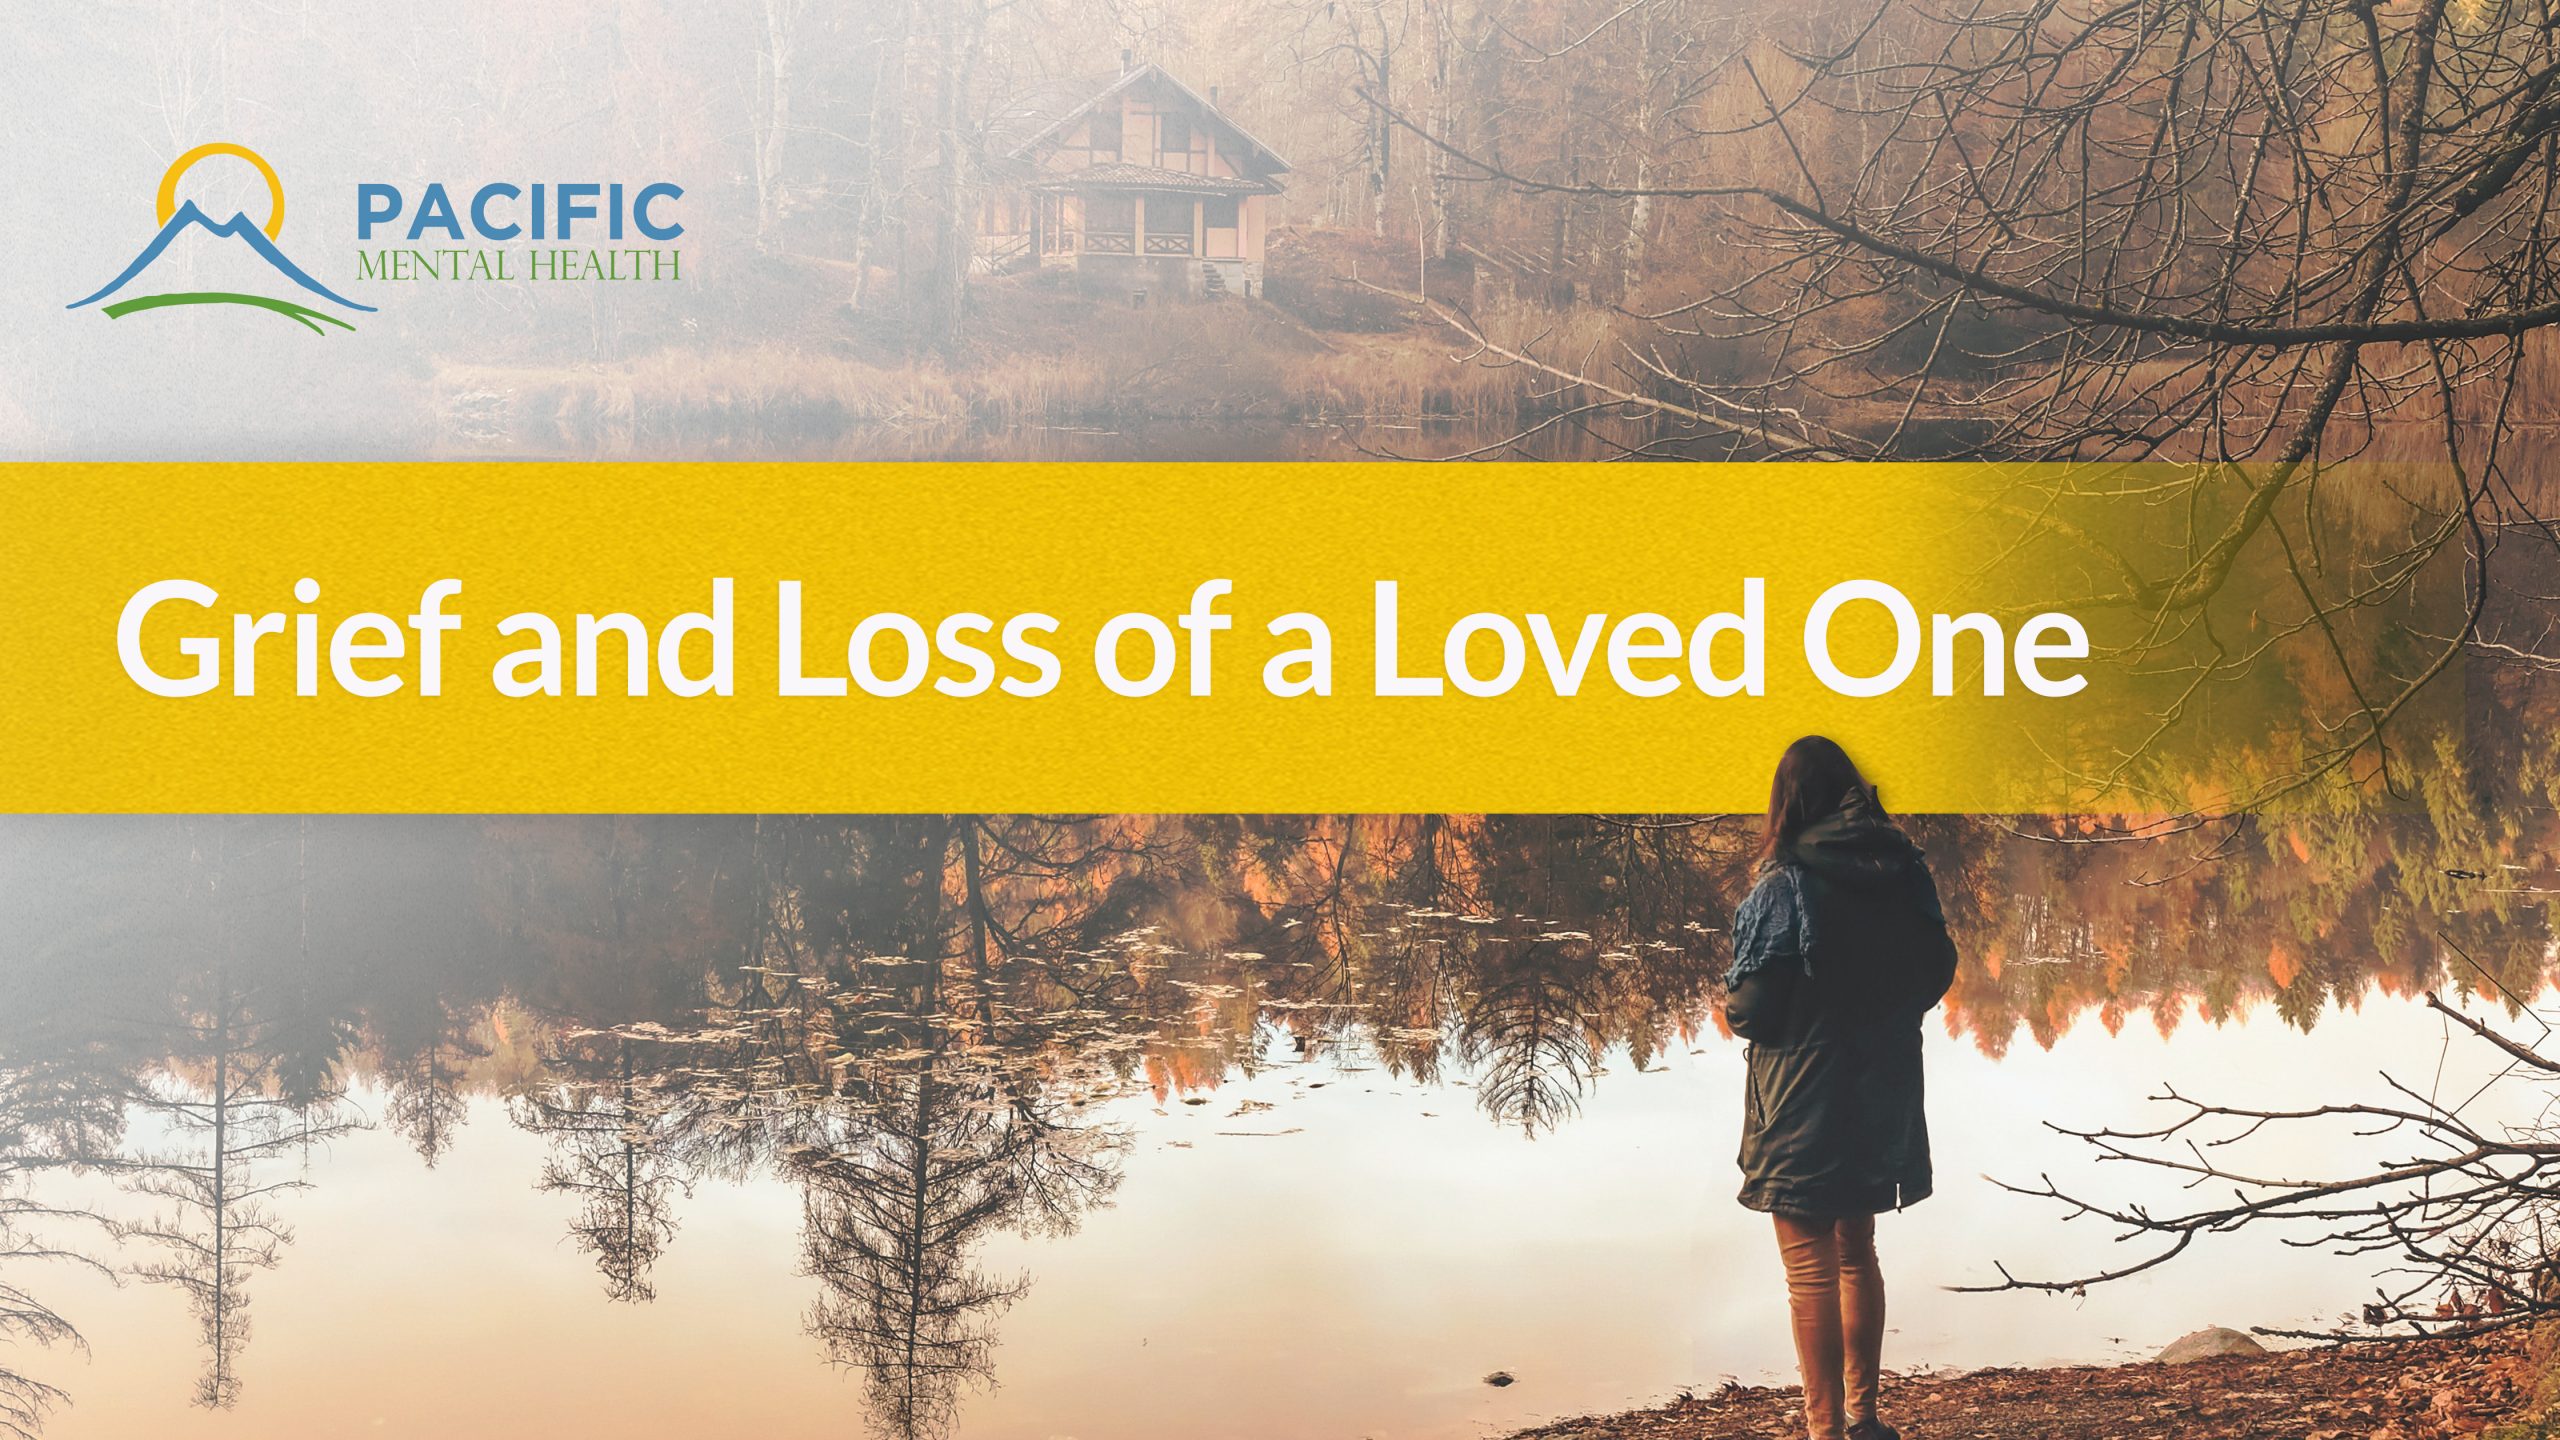 Mental health needs grief and loss of a loved one during covid